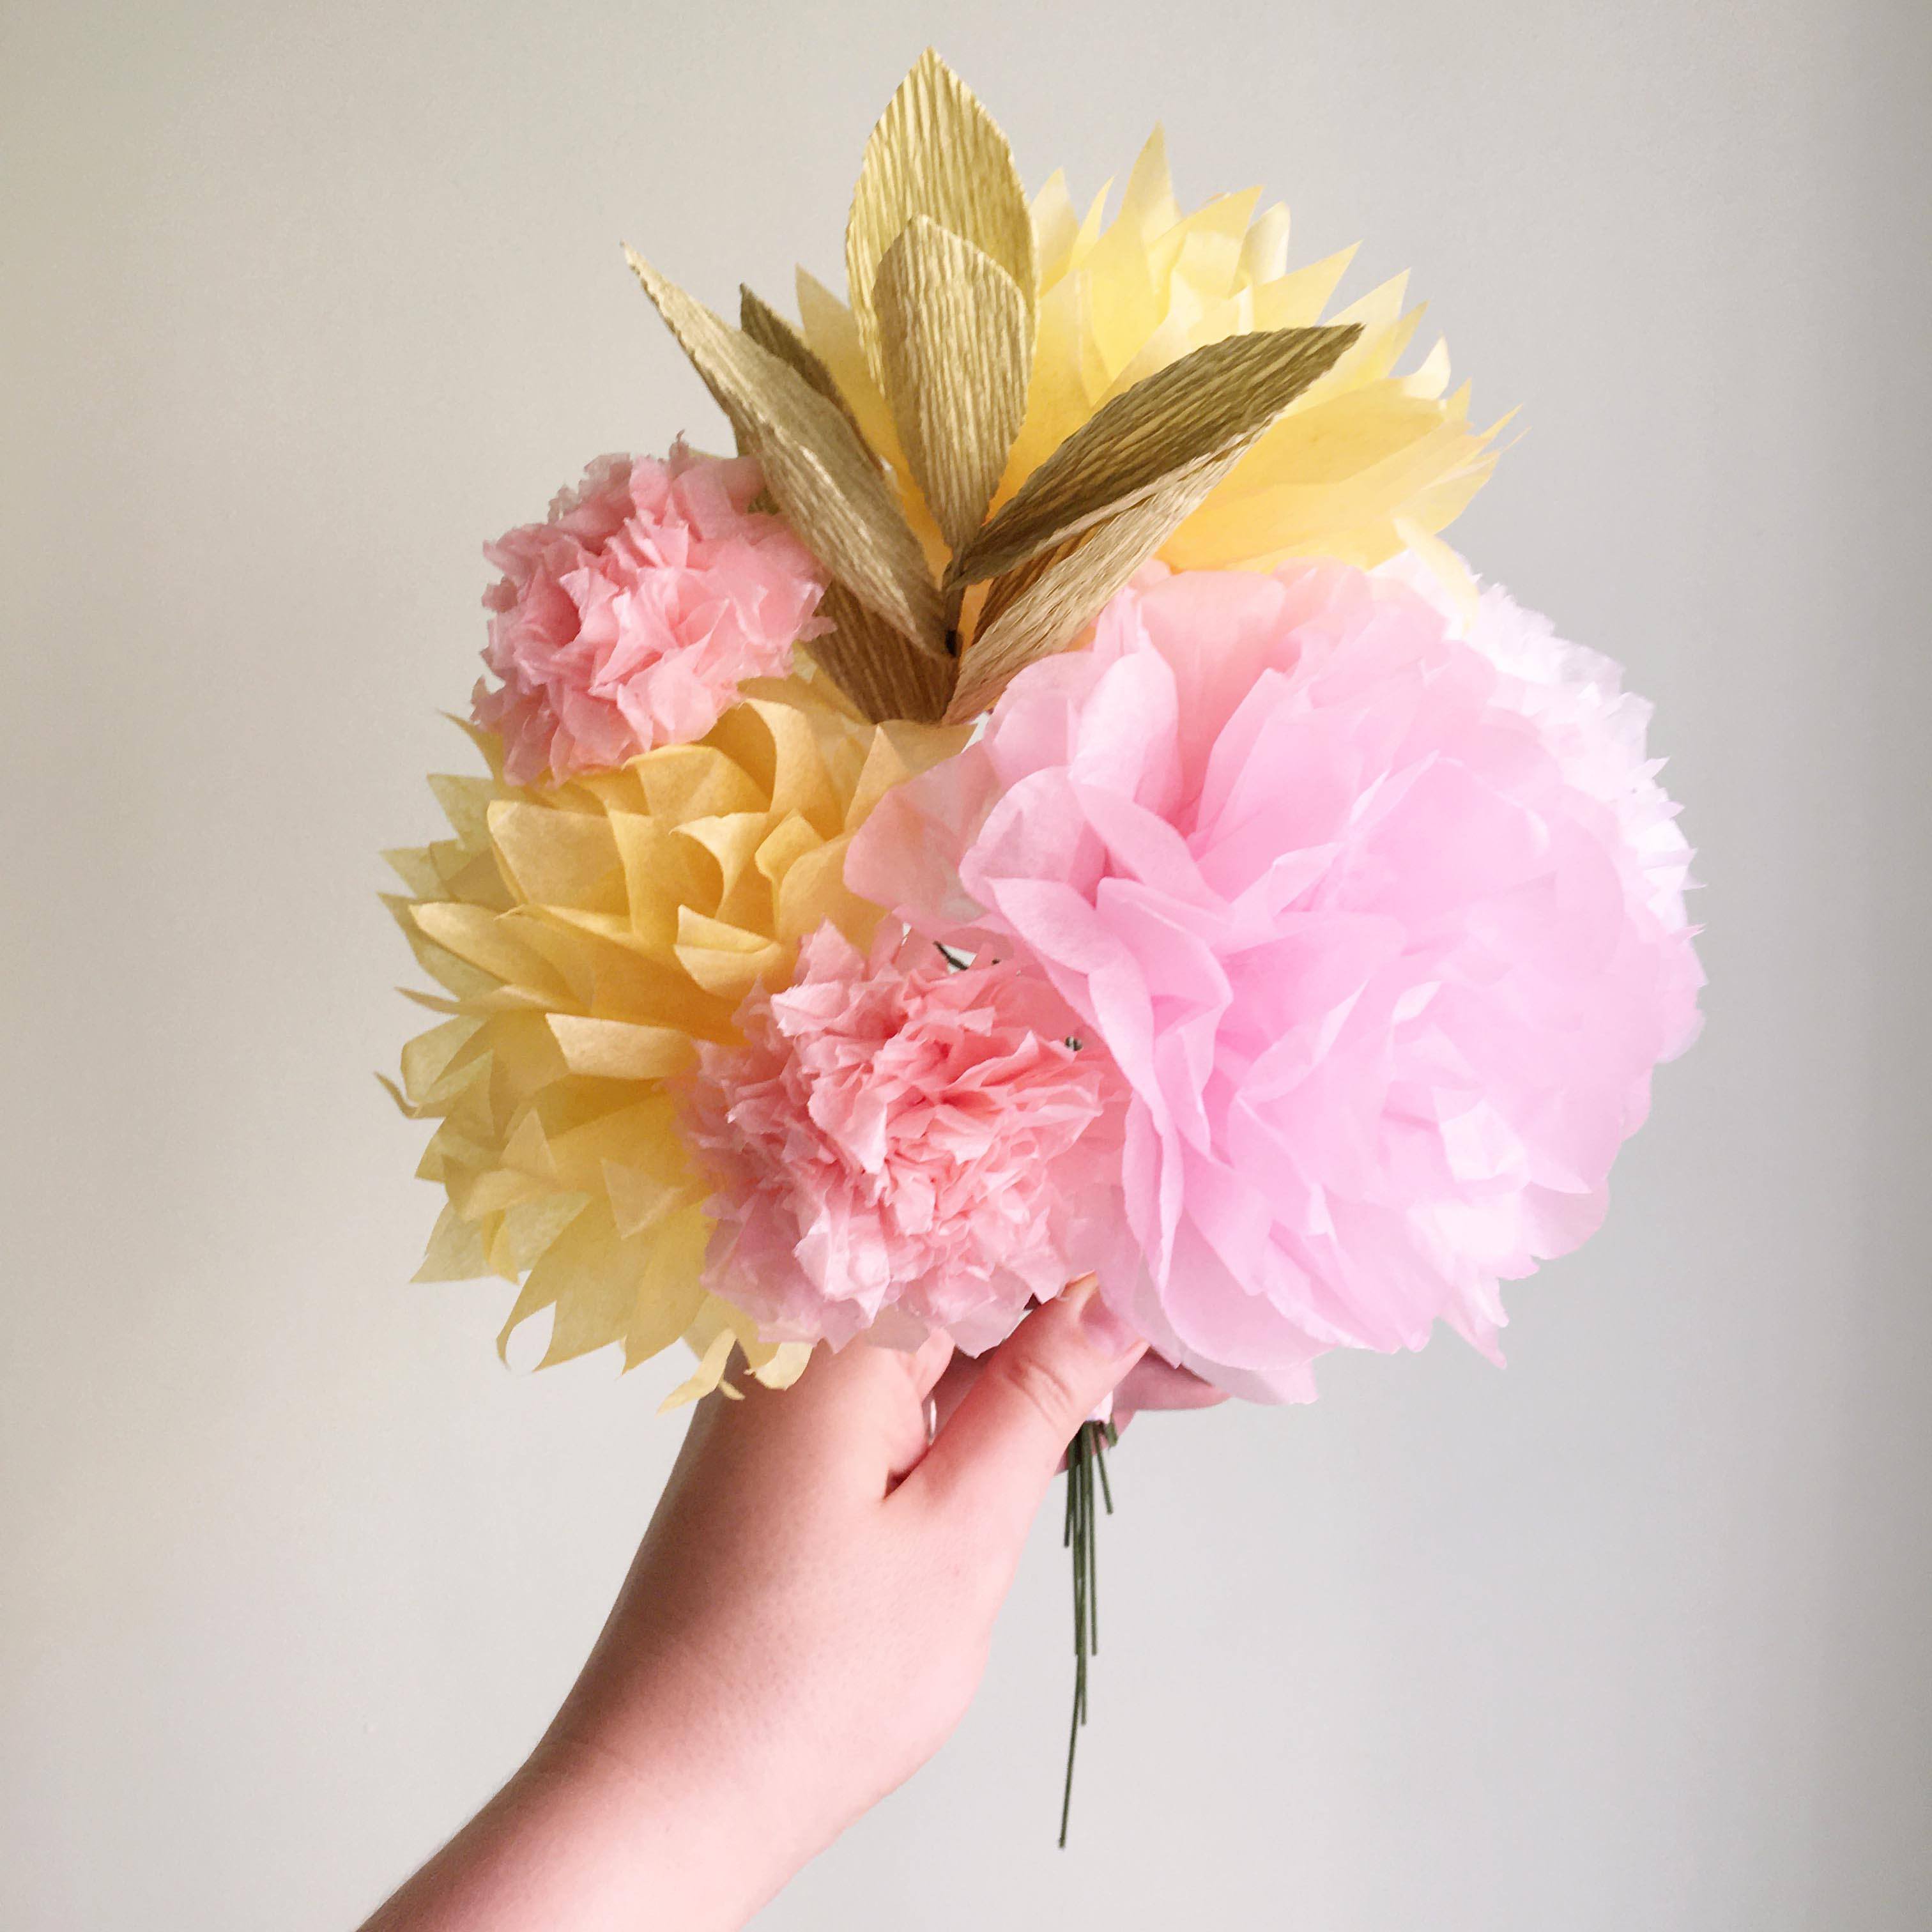 how to make paper flowers step by step easy